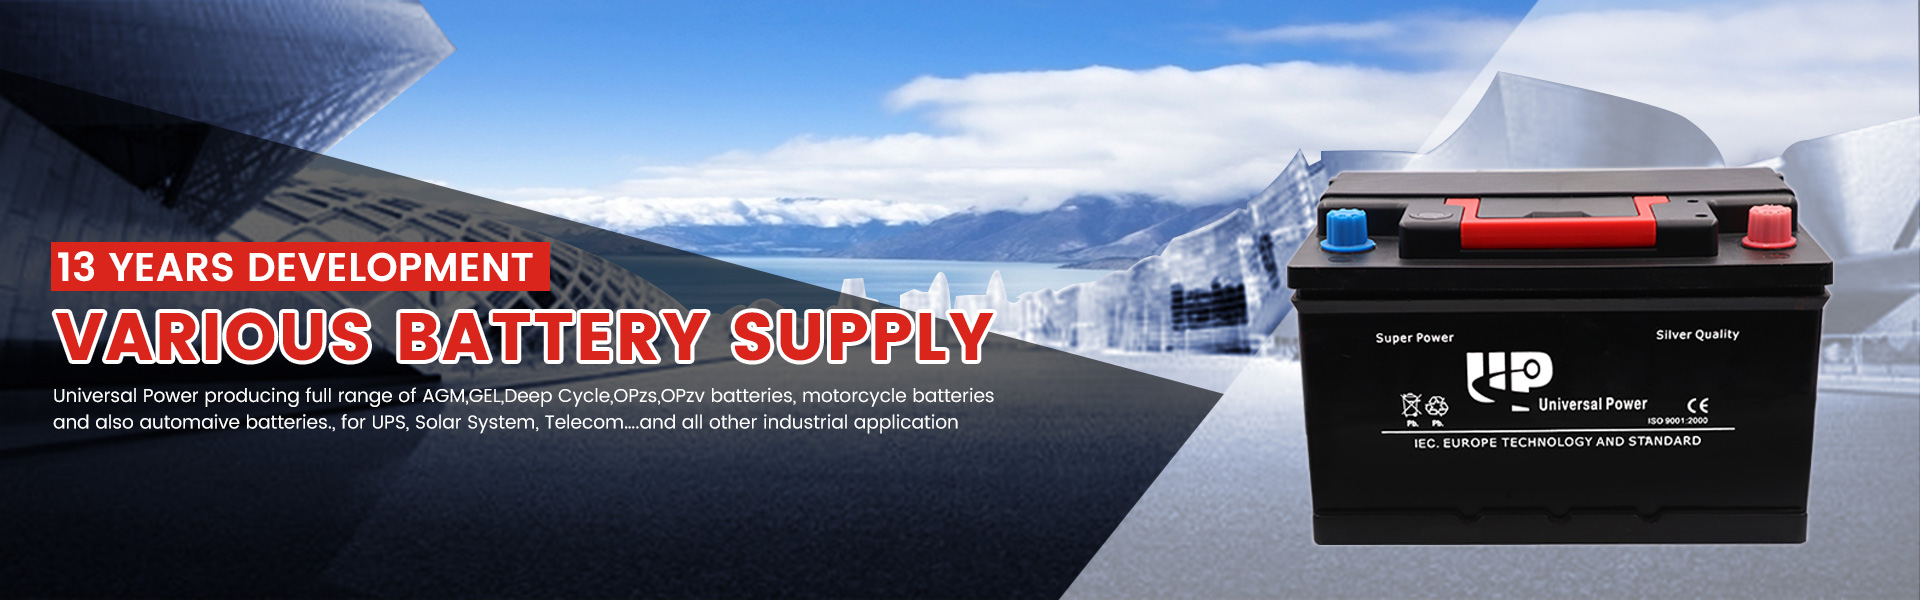 Various-Battery-Supply-Banner-02